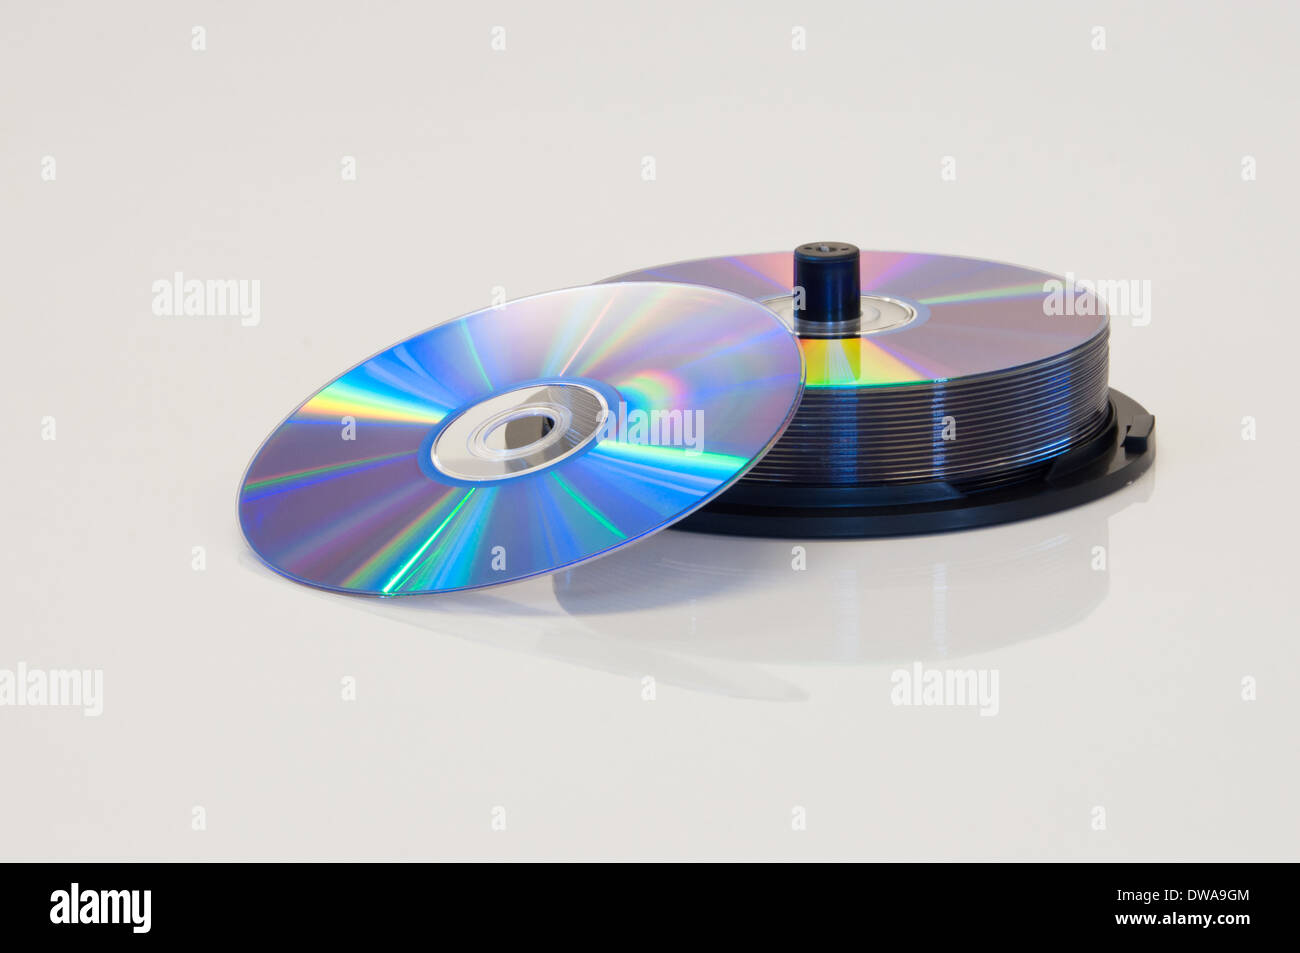 Spindle of blank CD's or DVDs Stock Photo